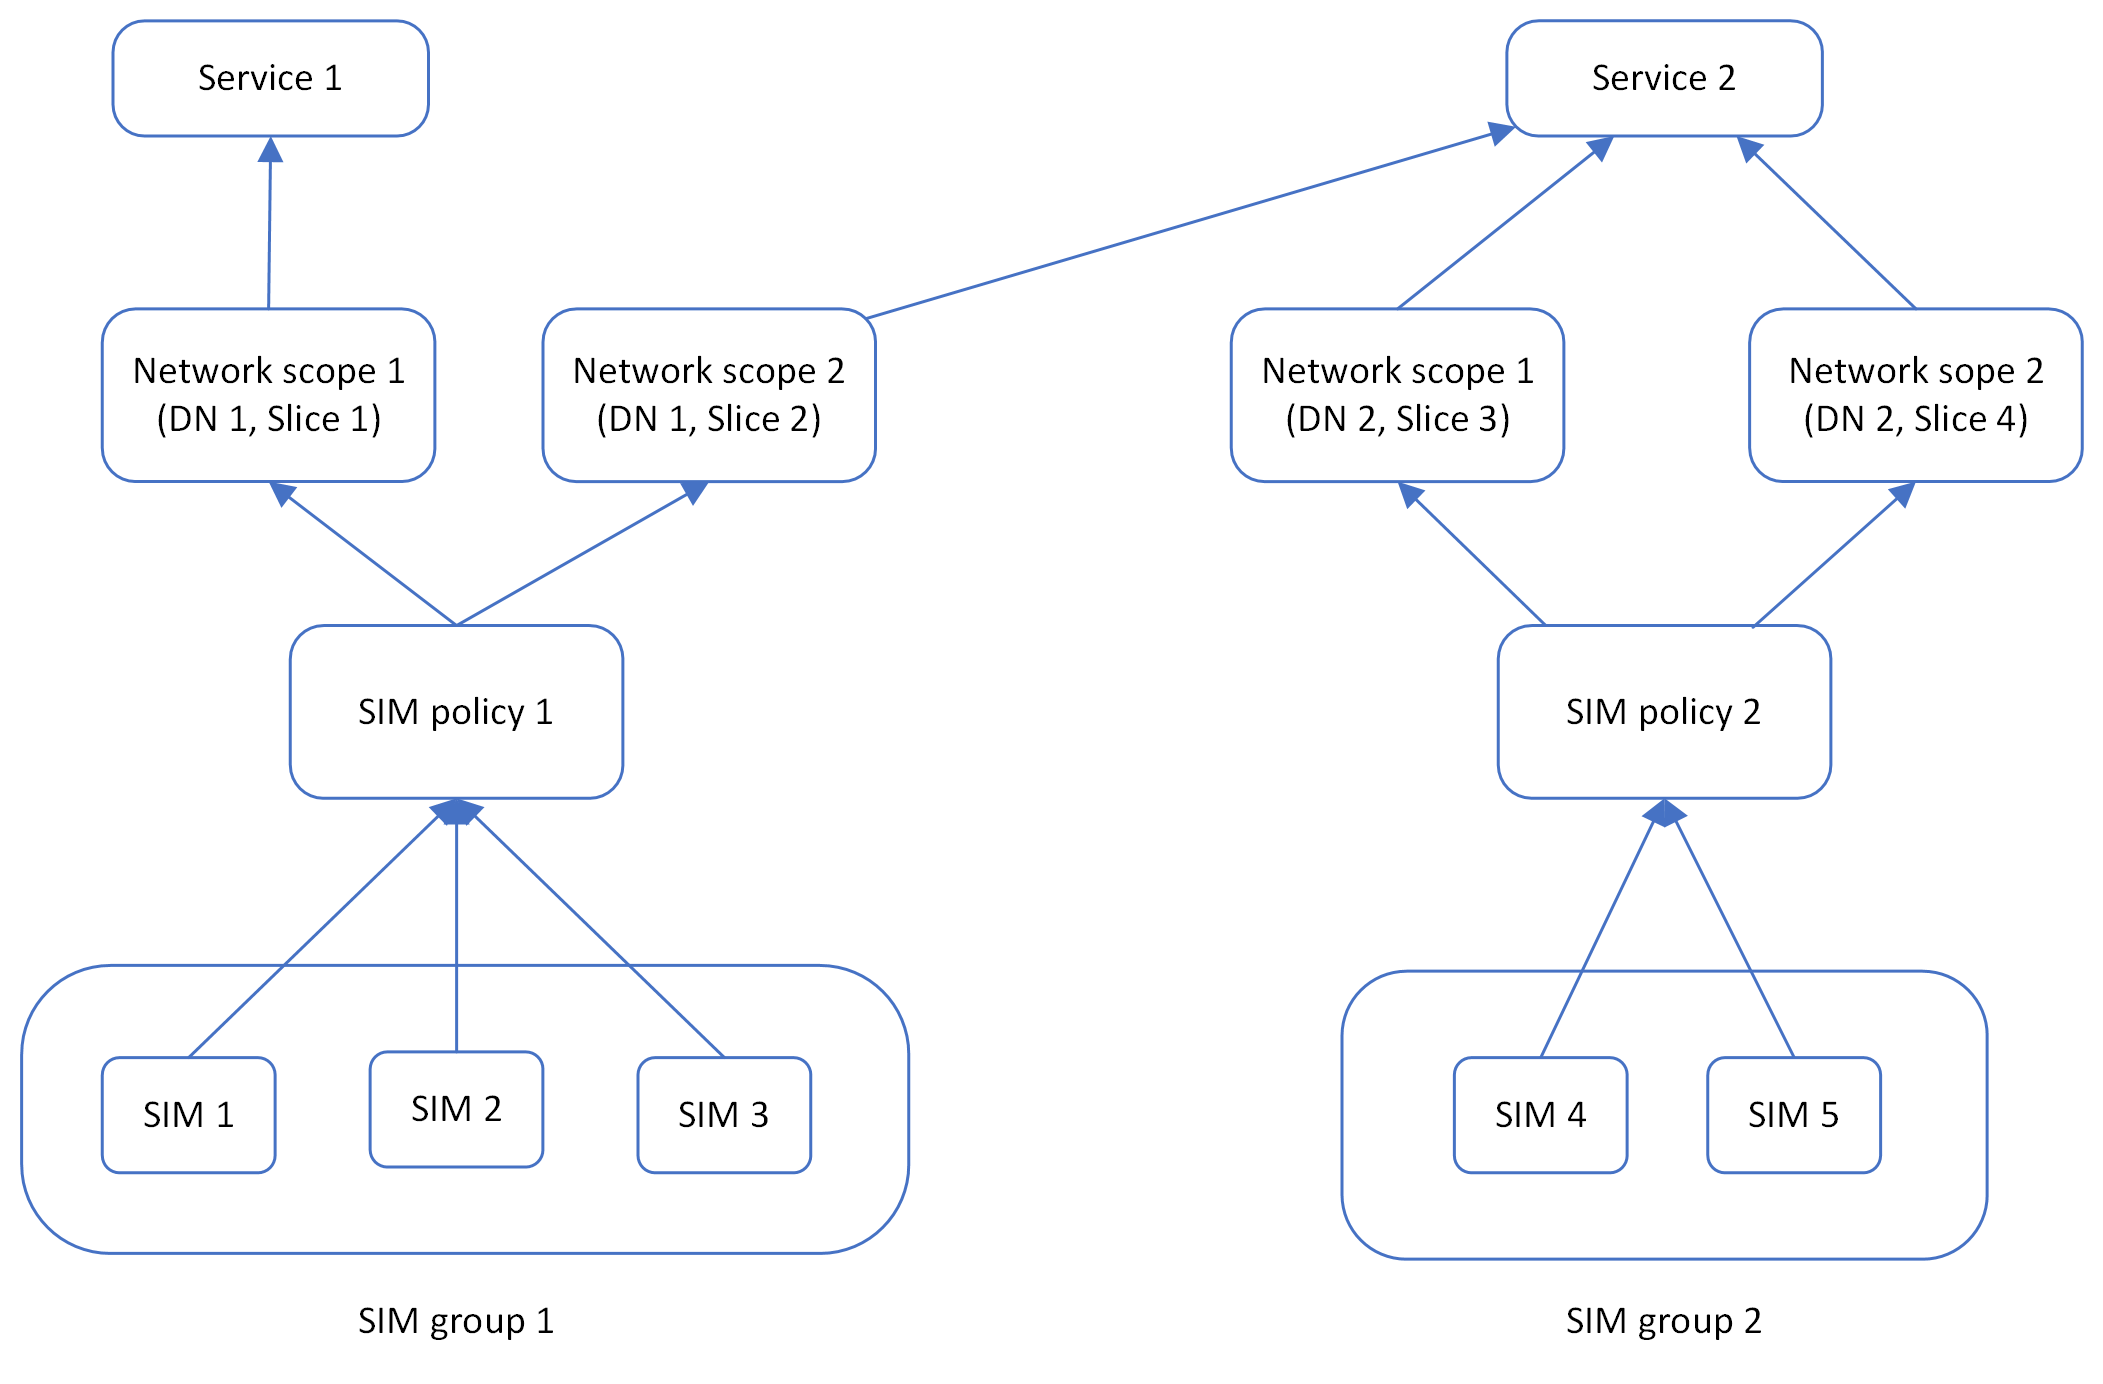 A diagram that shows two SIM policies and their related SIMs, SIM groups, and services.